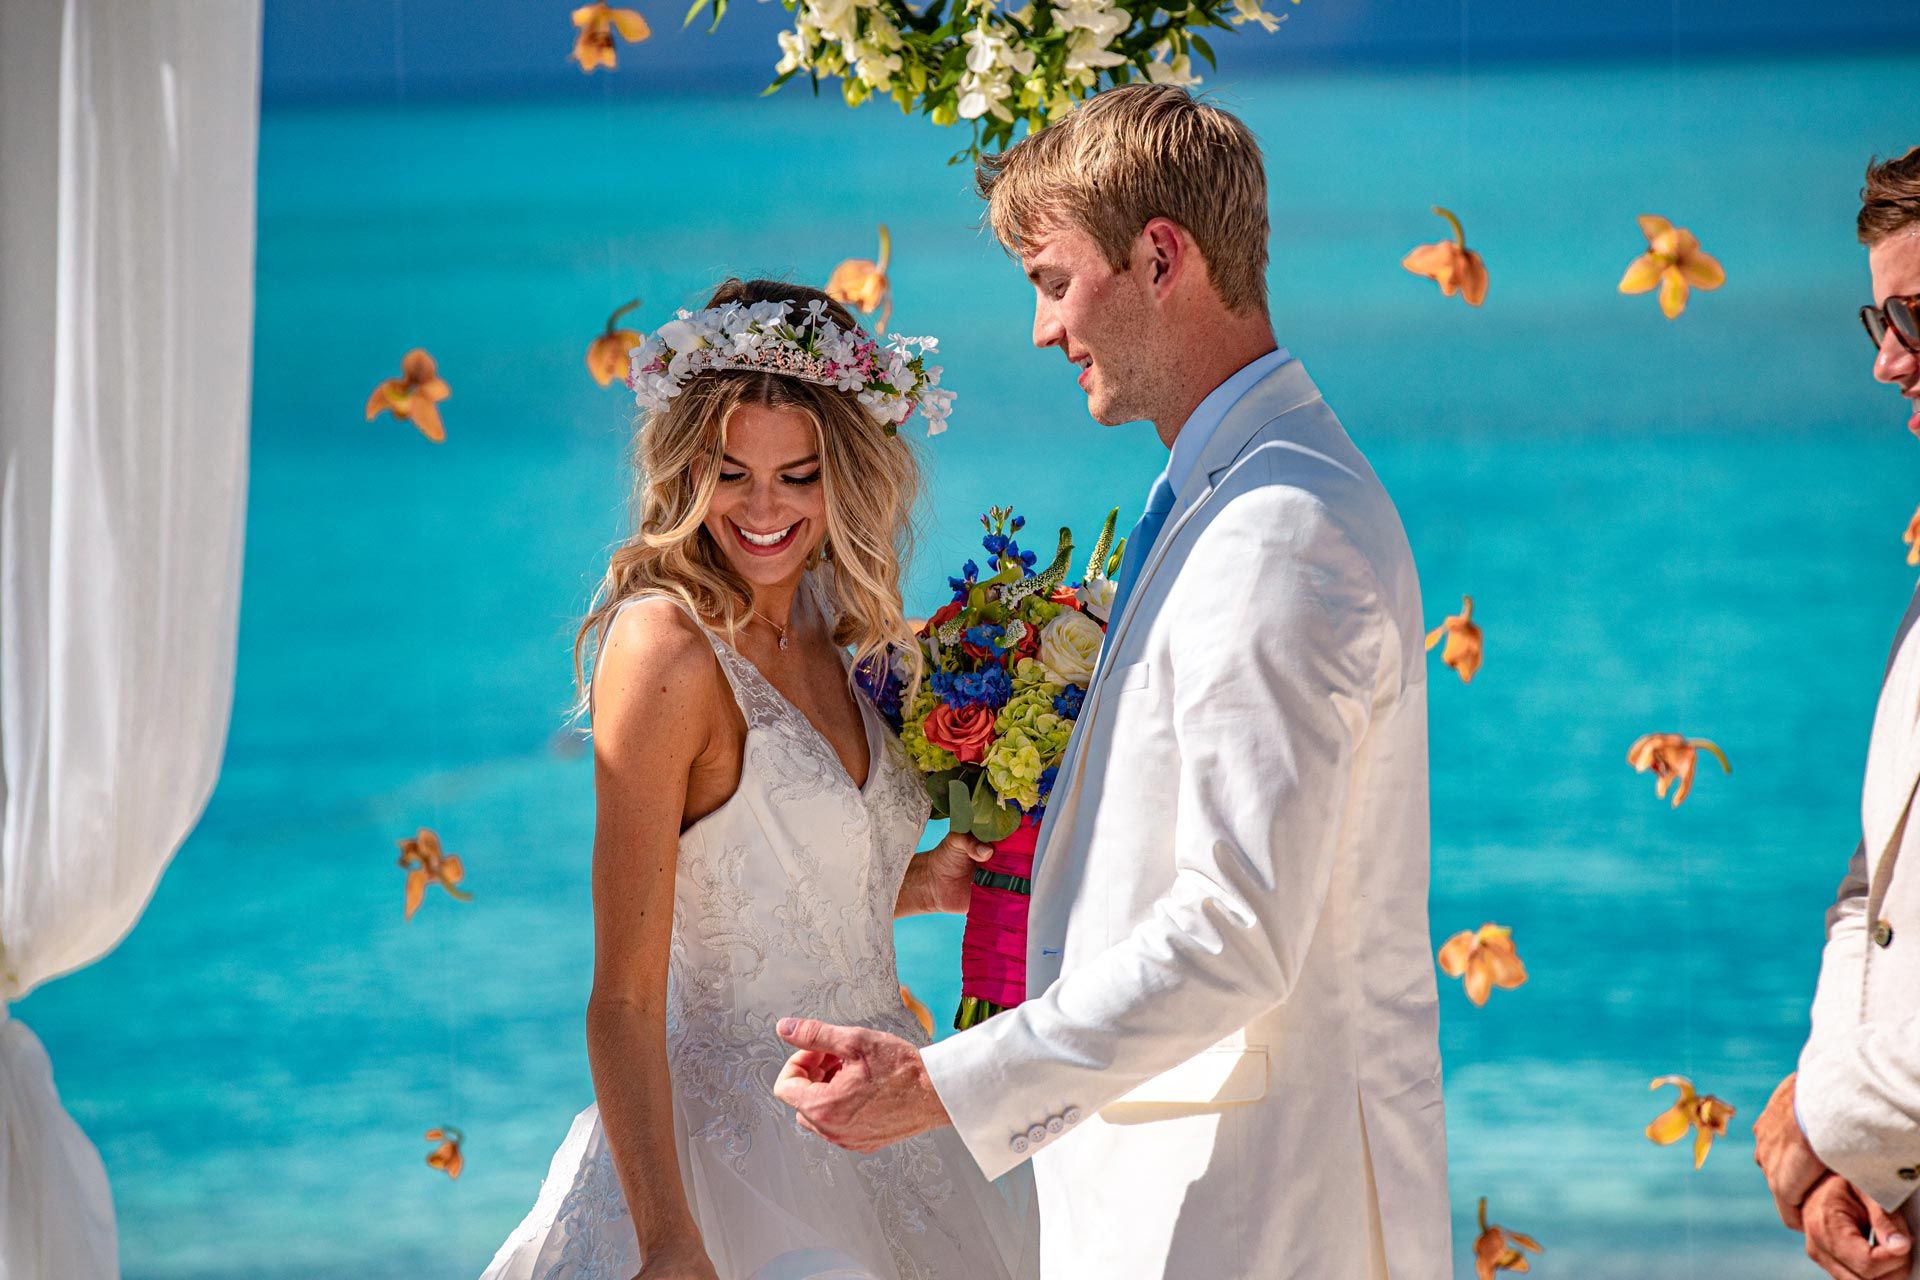 How to Plan a Destination Wedding in 12 Steps